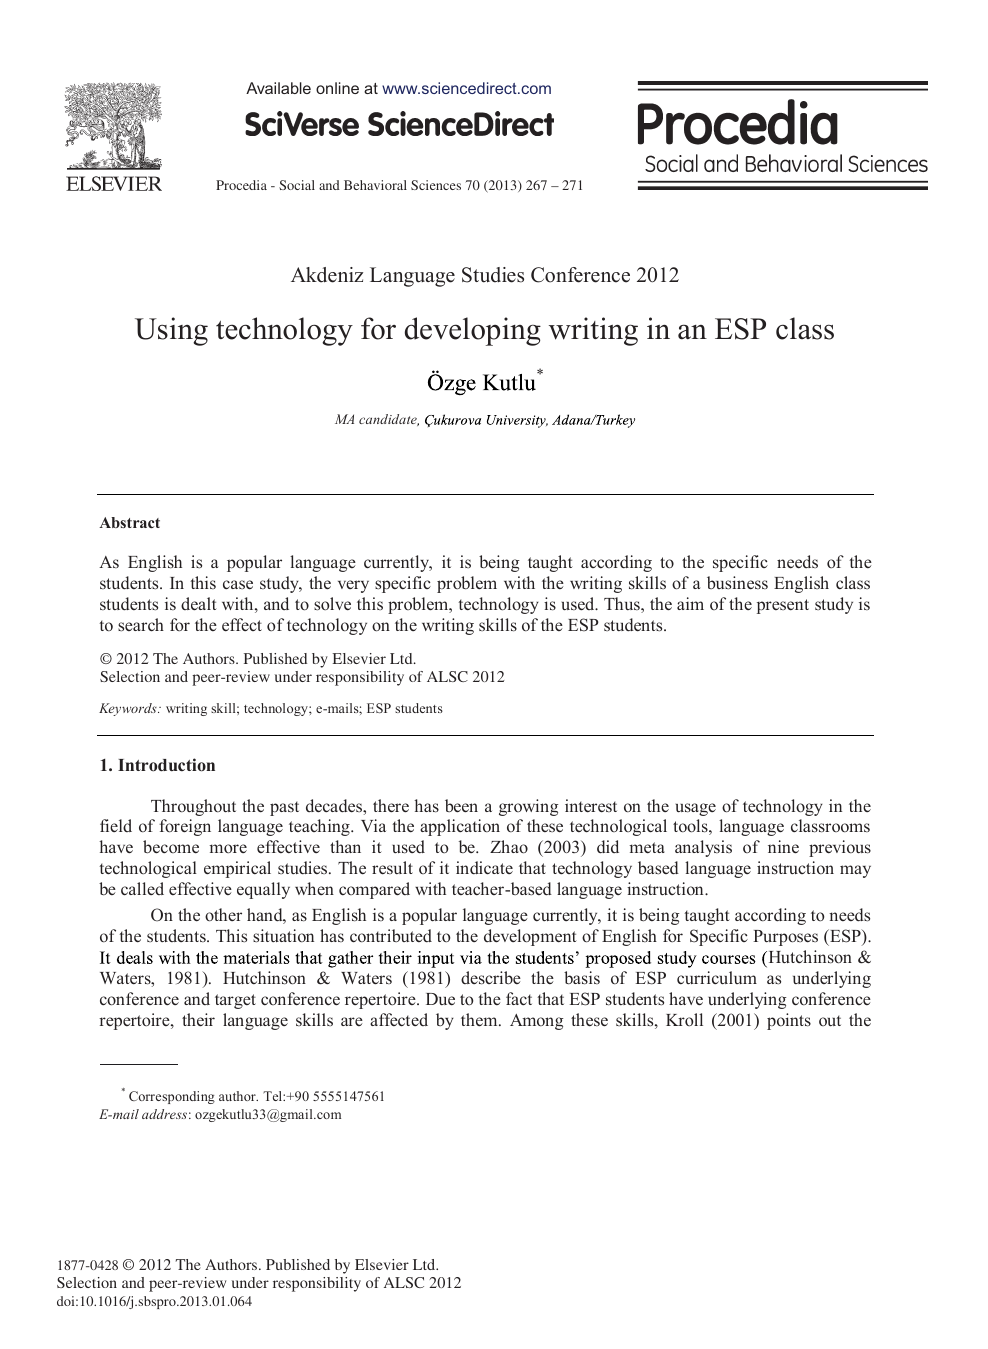 Using Technology For Developing Writing In An Esp Class Topic Of Research Paper In Educational Sciences Download Scholarly Article Pdf And Read For Free On Cyberleninka Open Science Hub